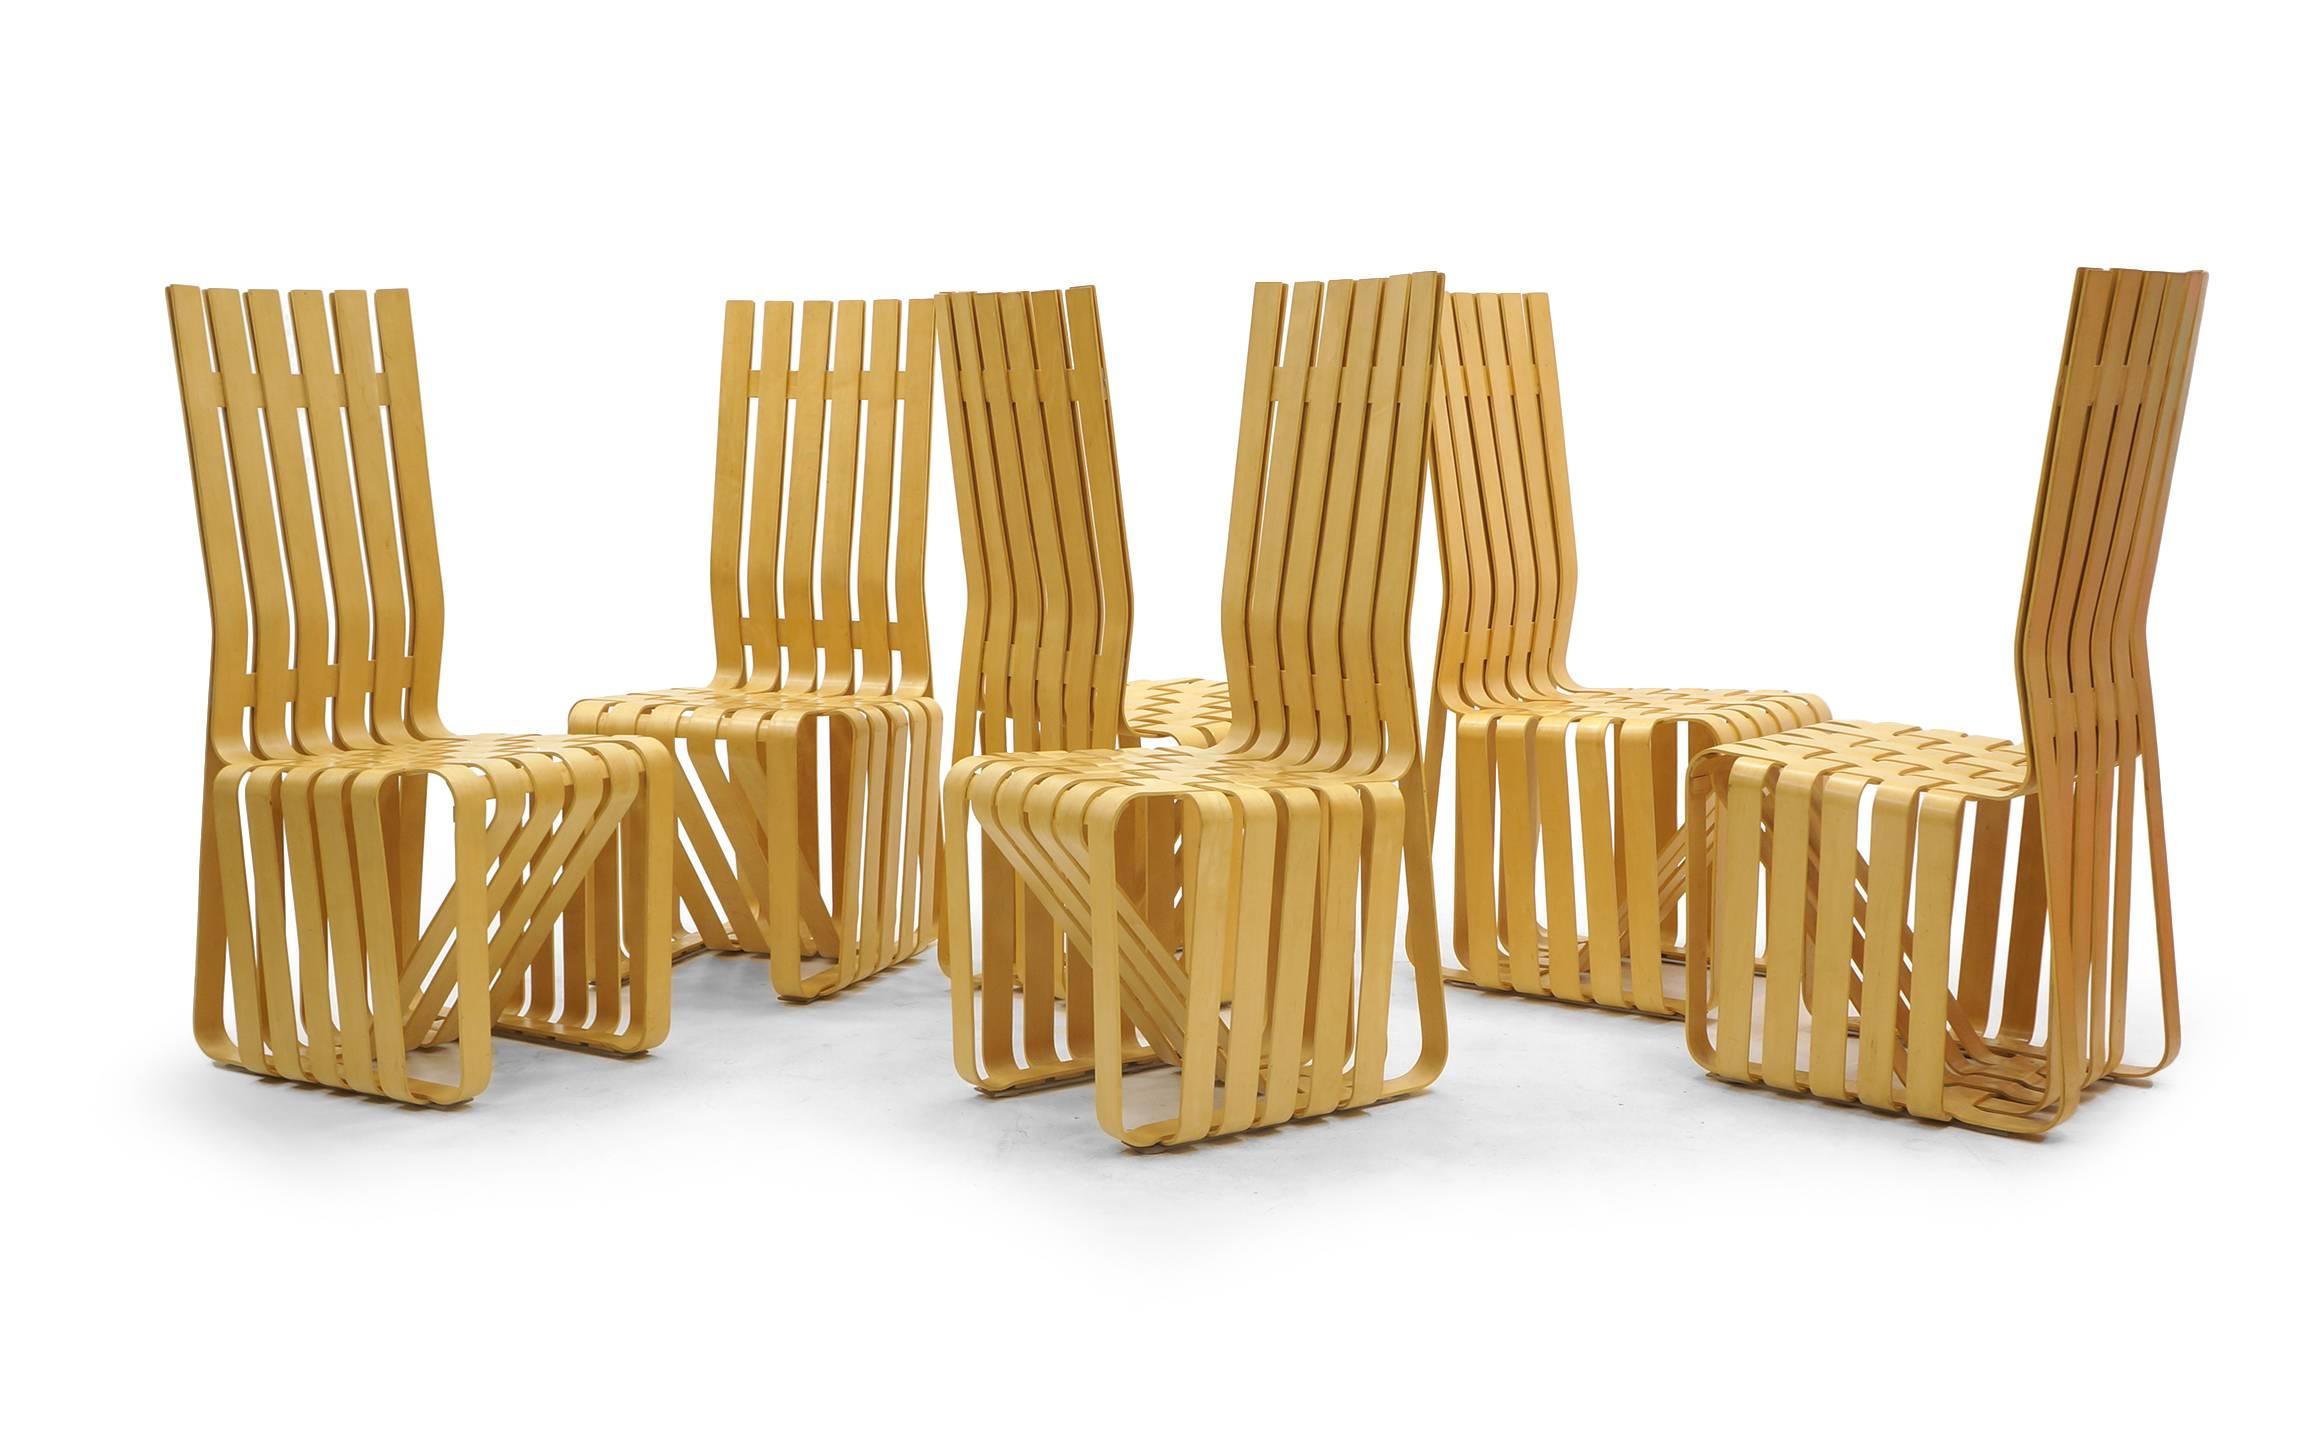 Set of six 'High Sticking' dining chairs by Frank Gehry, 1992, manufactured by Knoll. Inspired by the apple crates he had played on as a child, Pritzker Prize-winning architect Frank Gehry created the ribbon-like design of the High Sticking chair